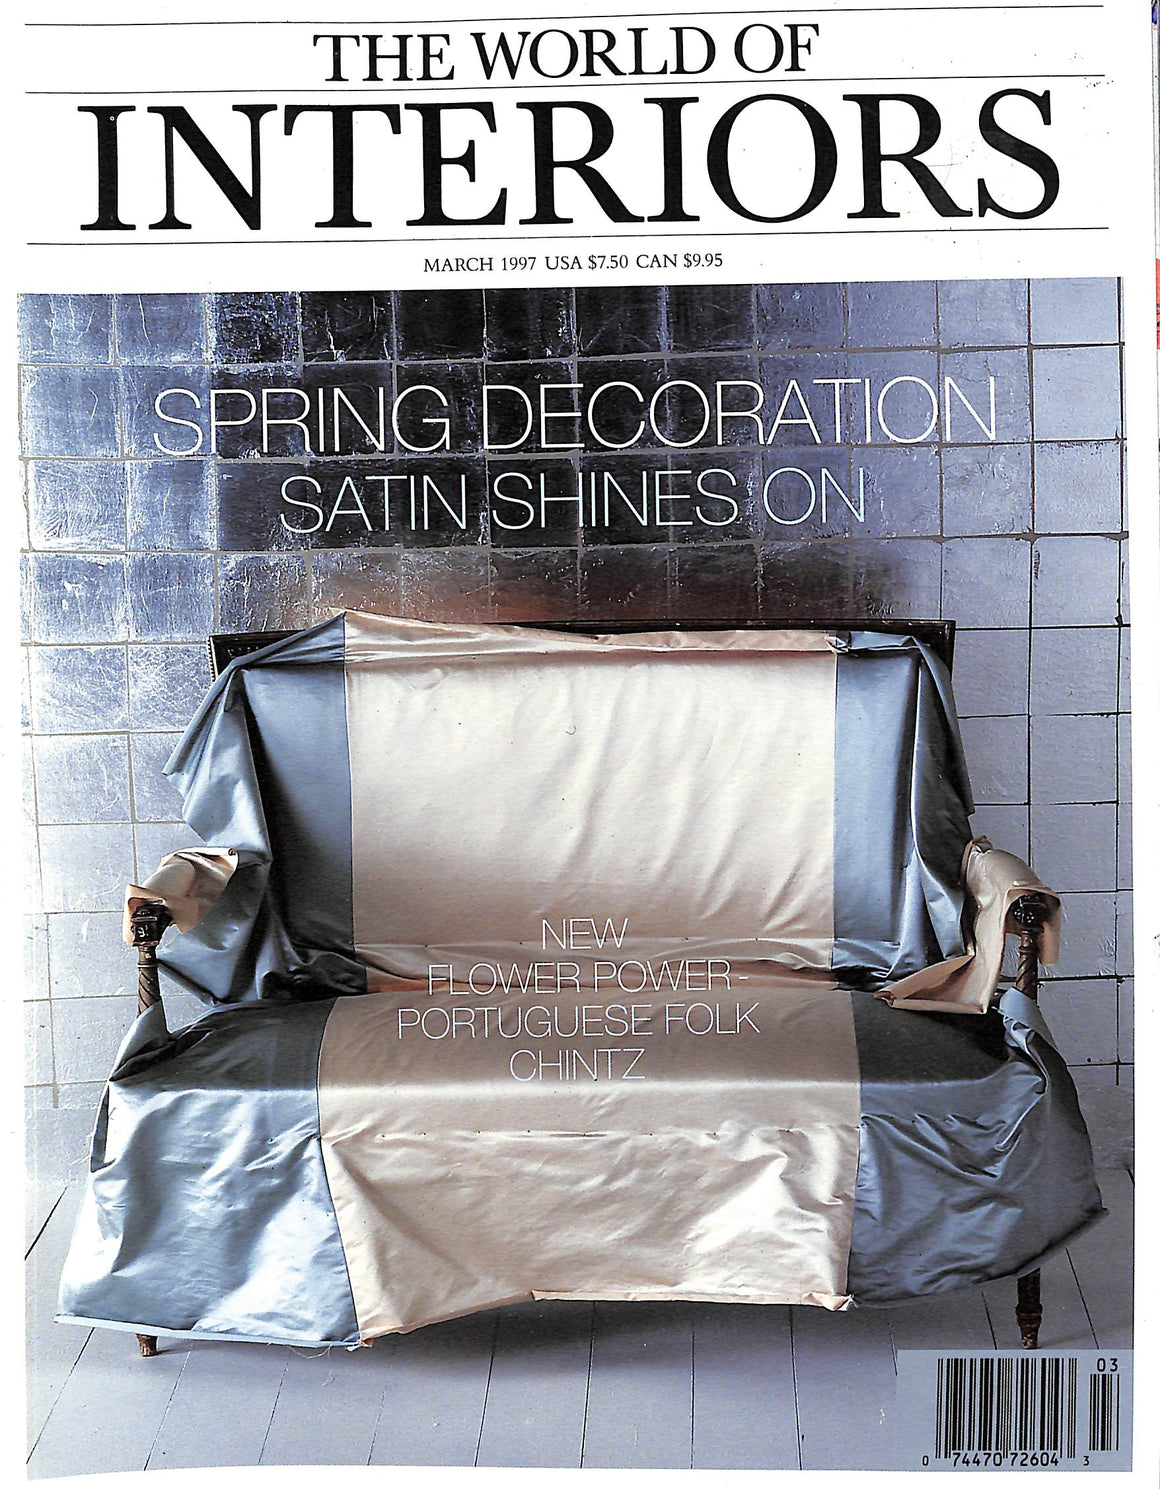 The World Of Interiors March 1997 (SOLD)